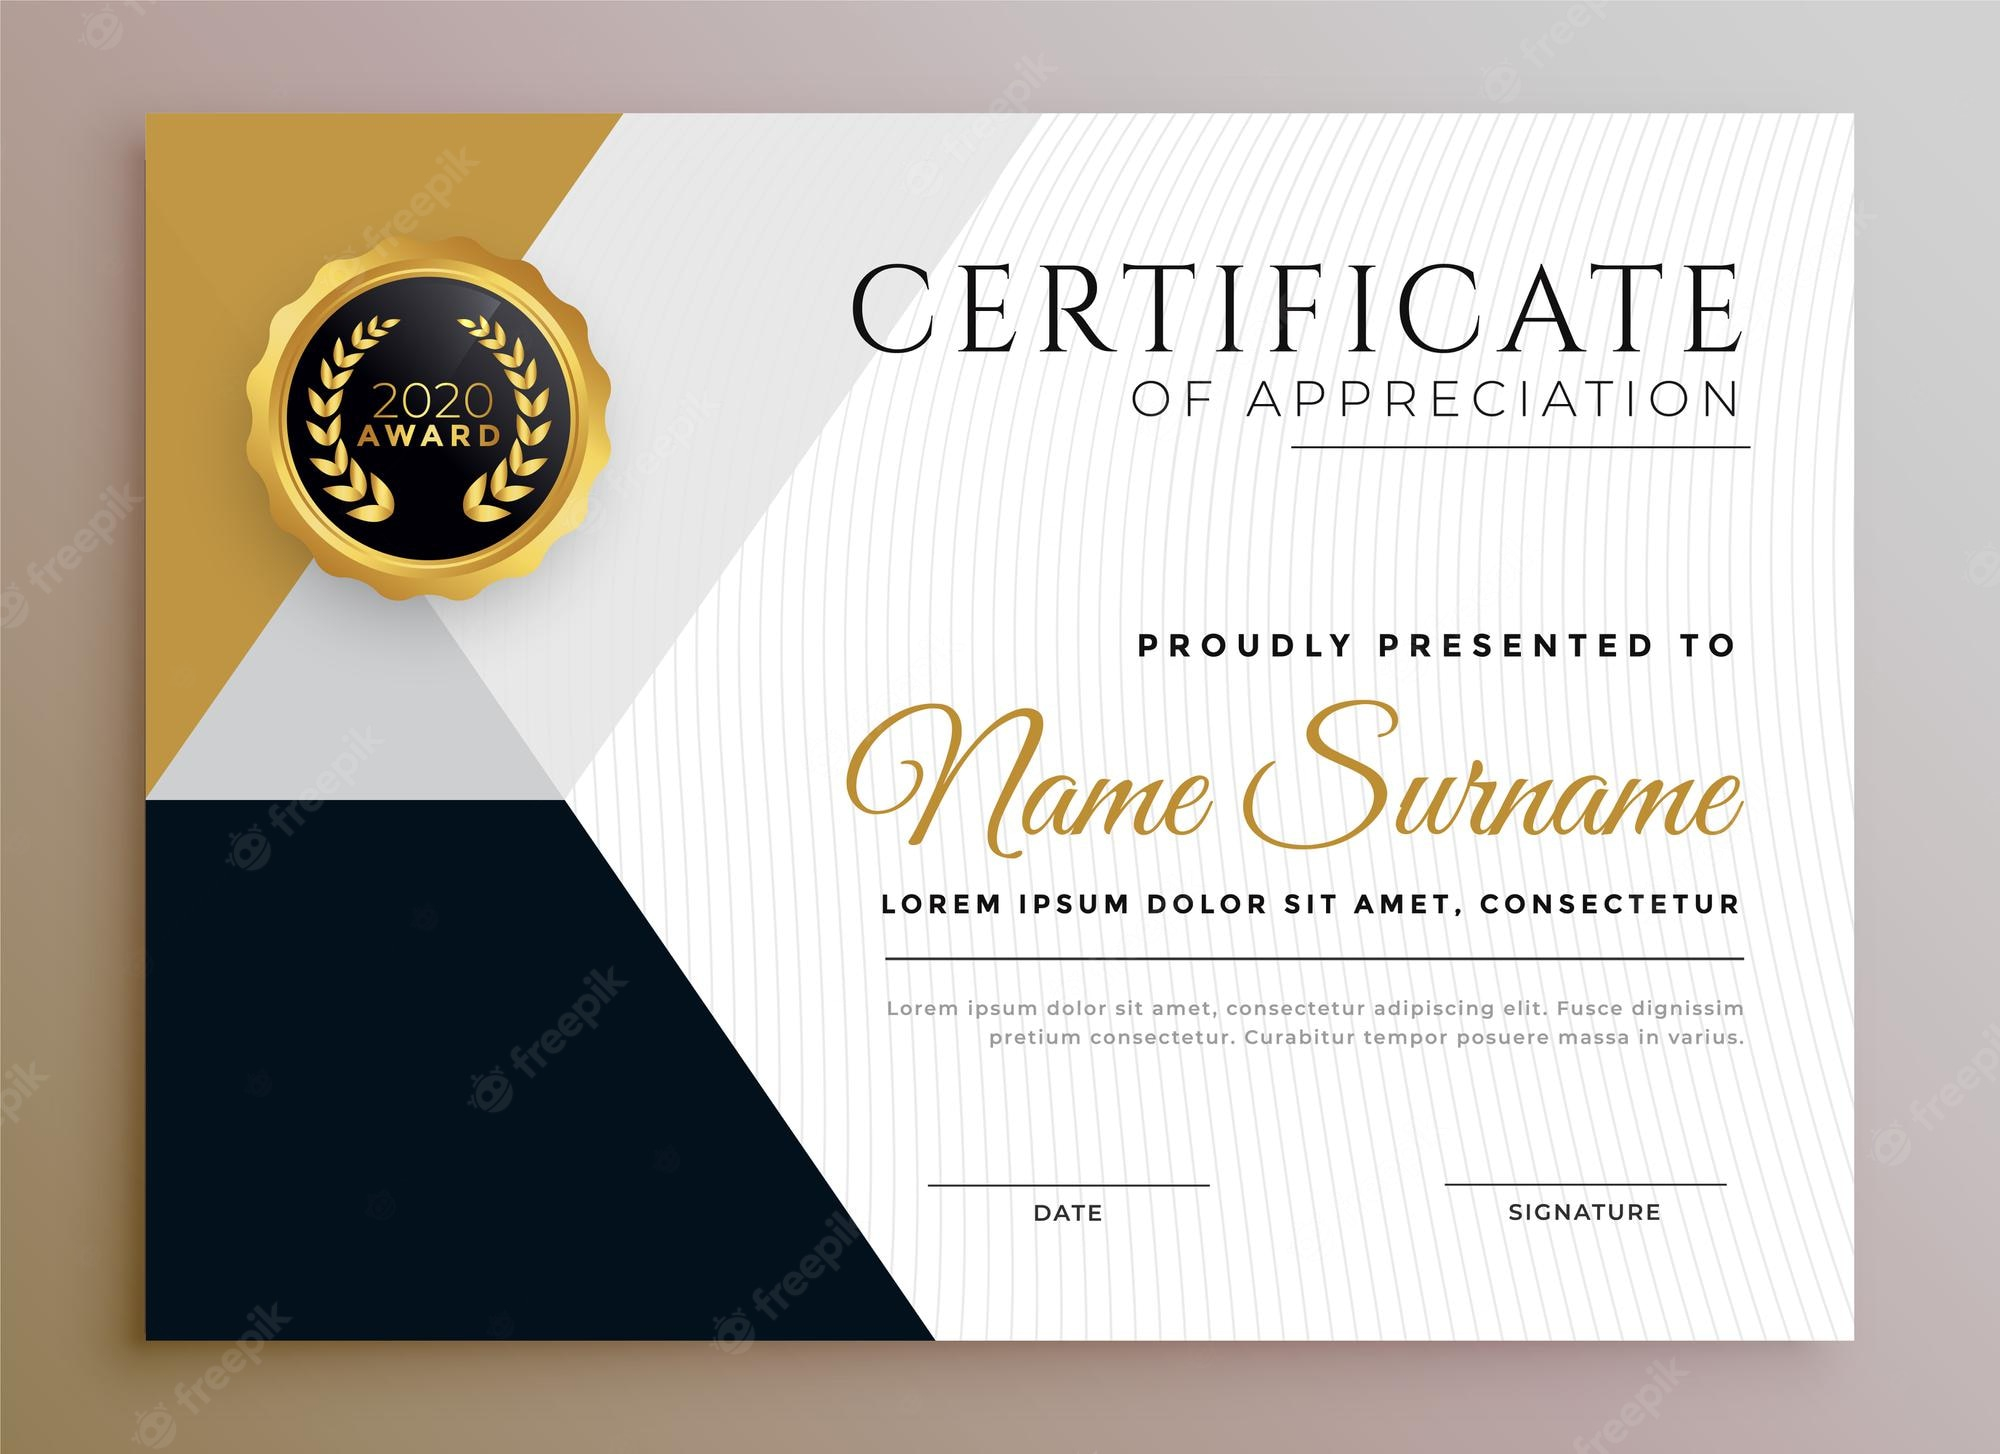 Certificate of recognition Images  Free Vectors, Stock Photos & PSD Inside Free Template For Certificate Of Recognition